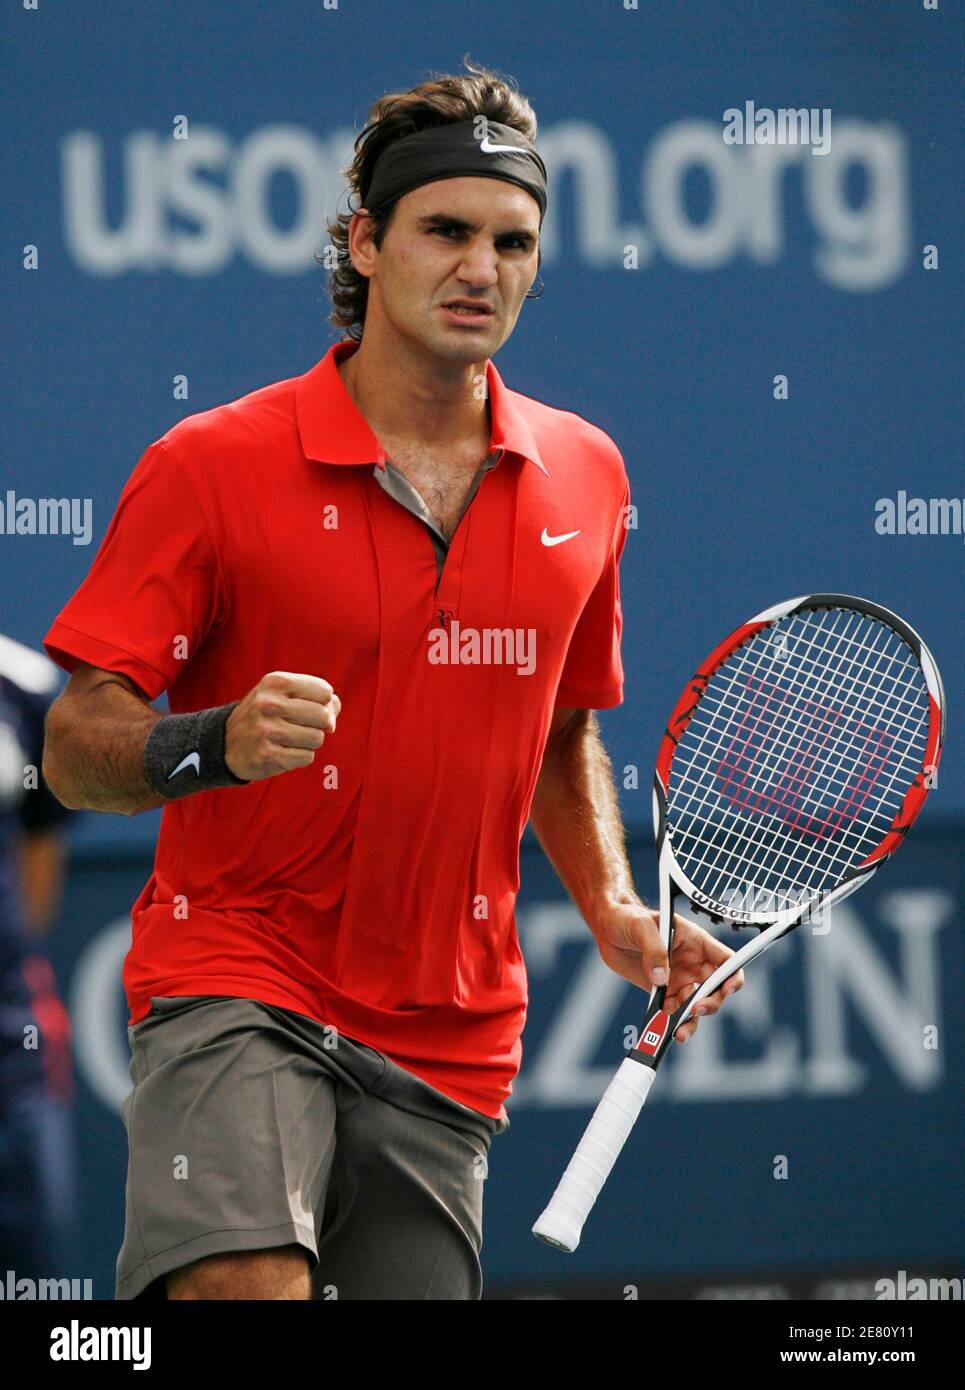 Roger Federer of Switzerland pumps his fist after a point against Thiago  Alves of Brazil during their match at the U.S. Open tennis tournament at  Flushing Meadows in New York, August 29,